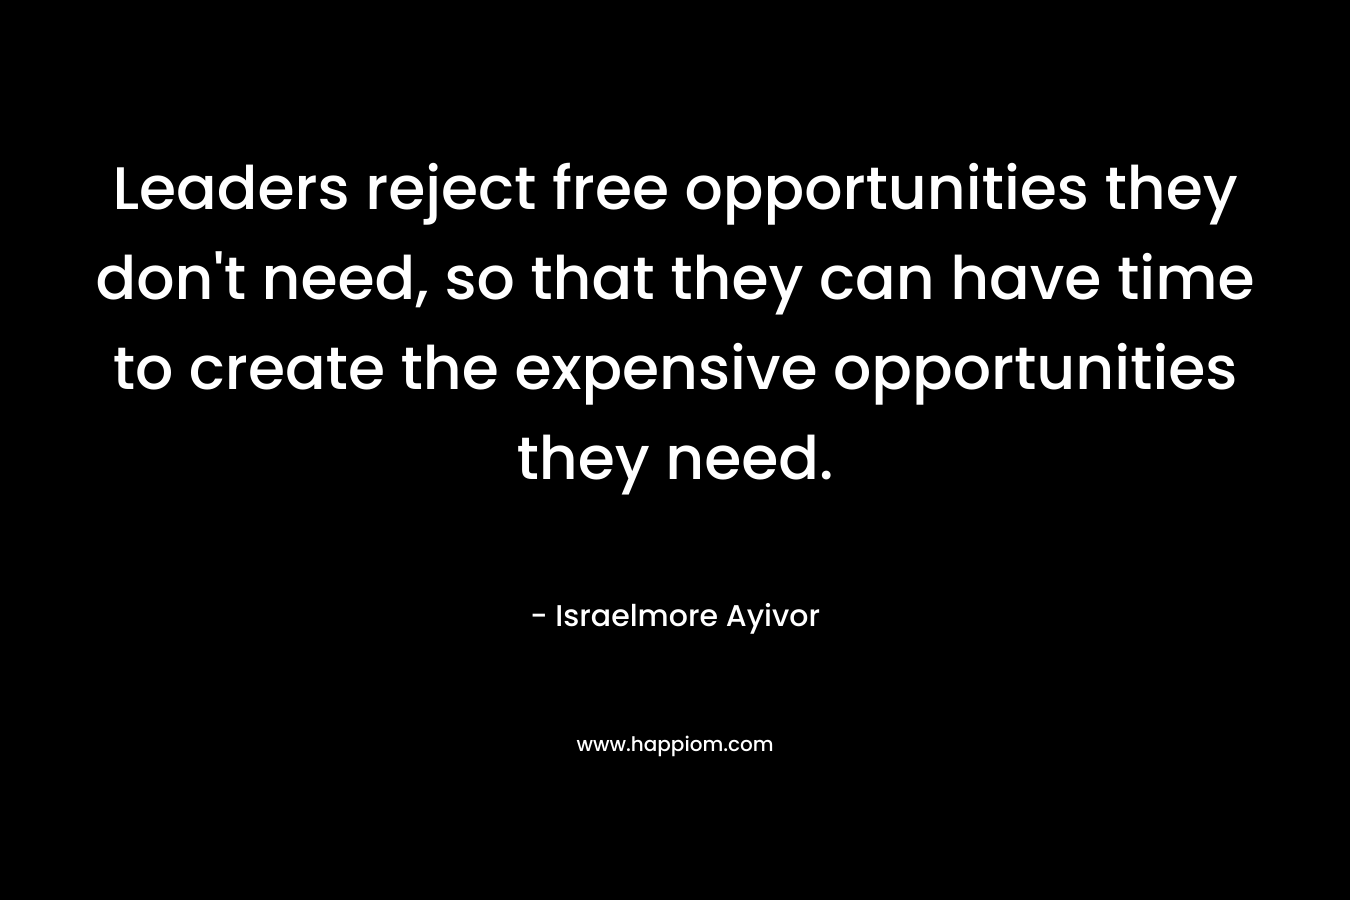 Leaders reject free opportunities they don't need, so that they can have time to create the expensive opportunities they need.